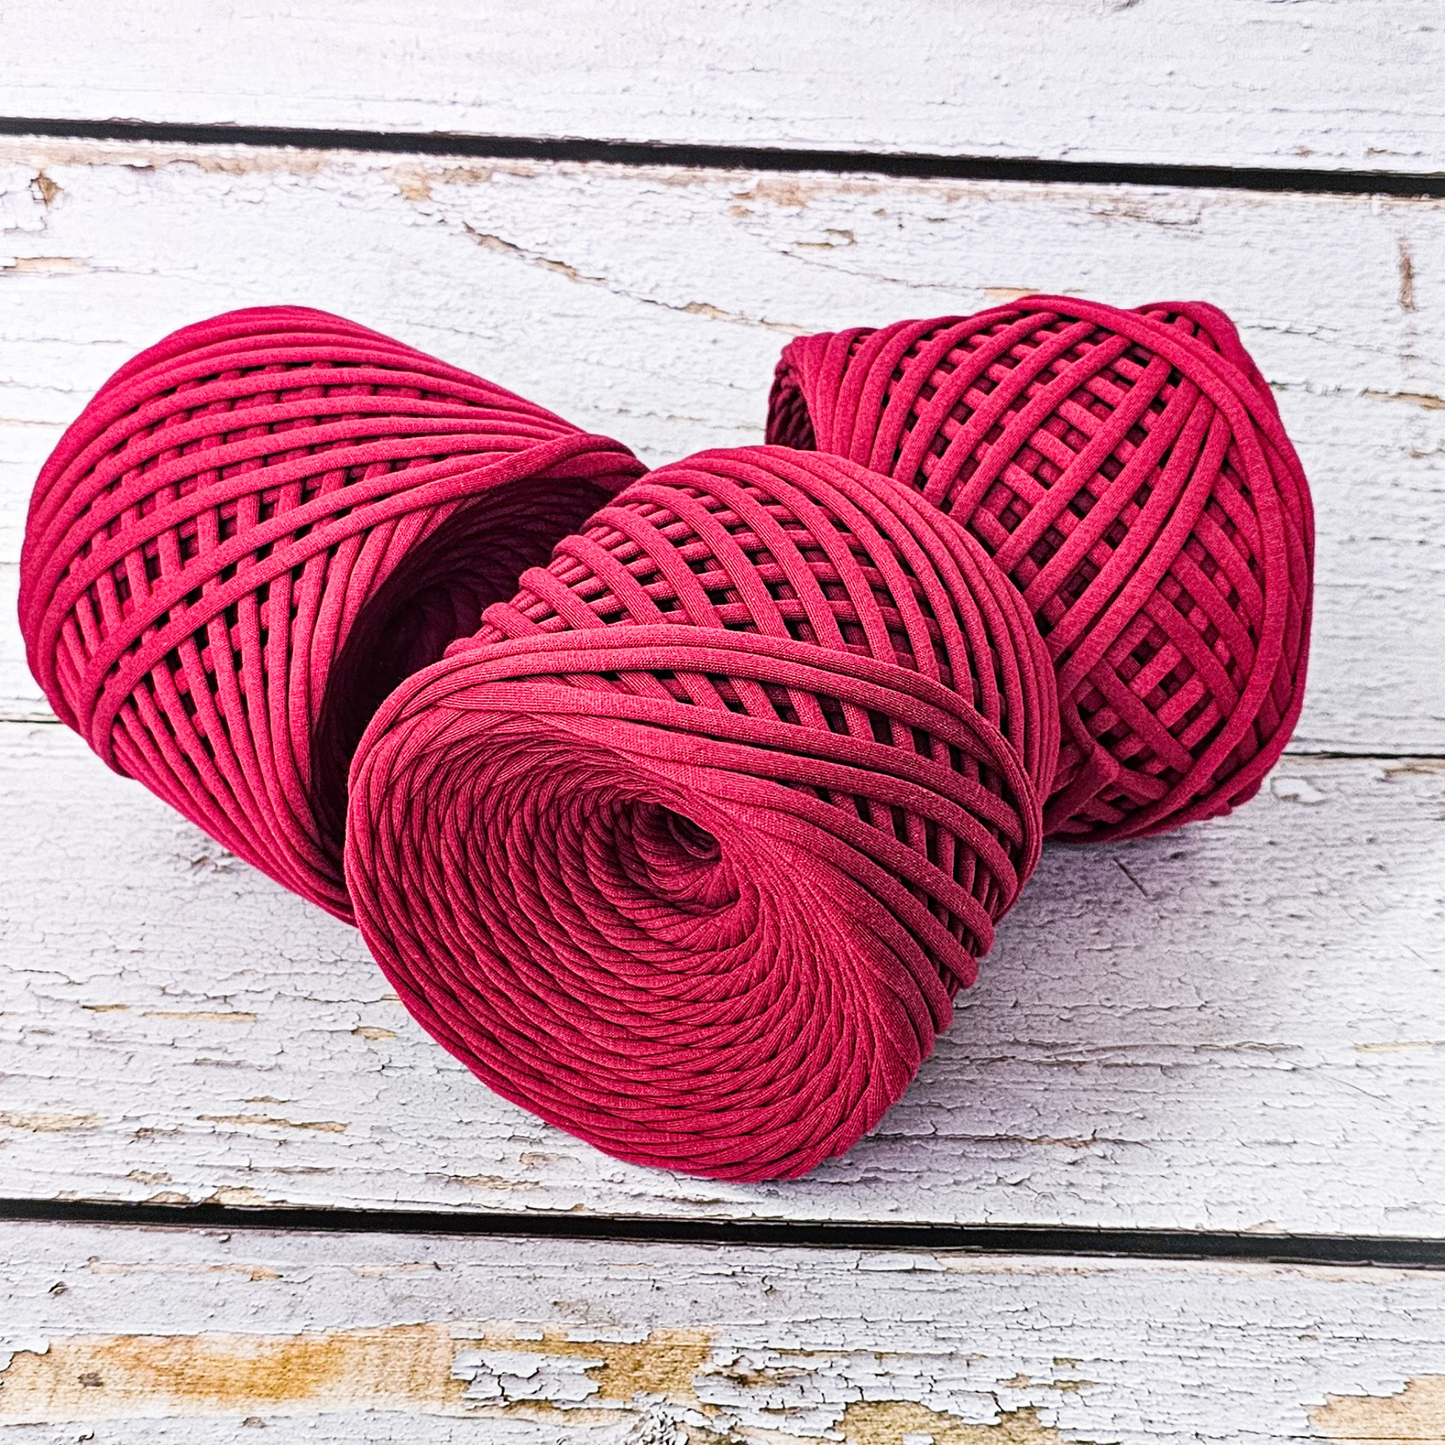 T-shirt yarn for crocheting baskets, bags, rugs and home decor. Berry